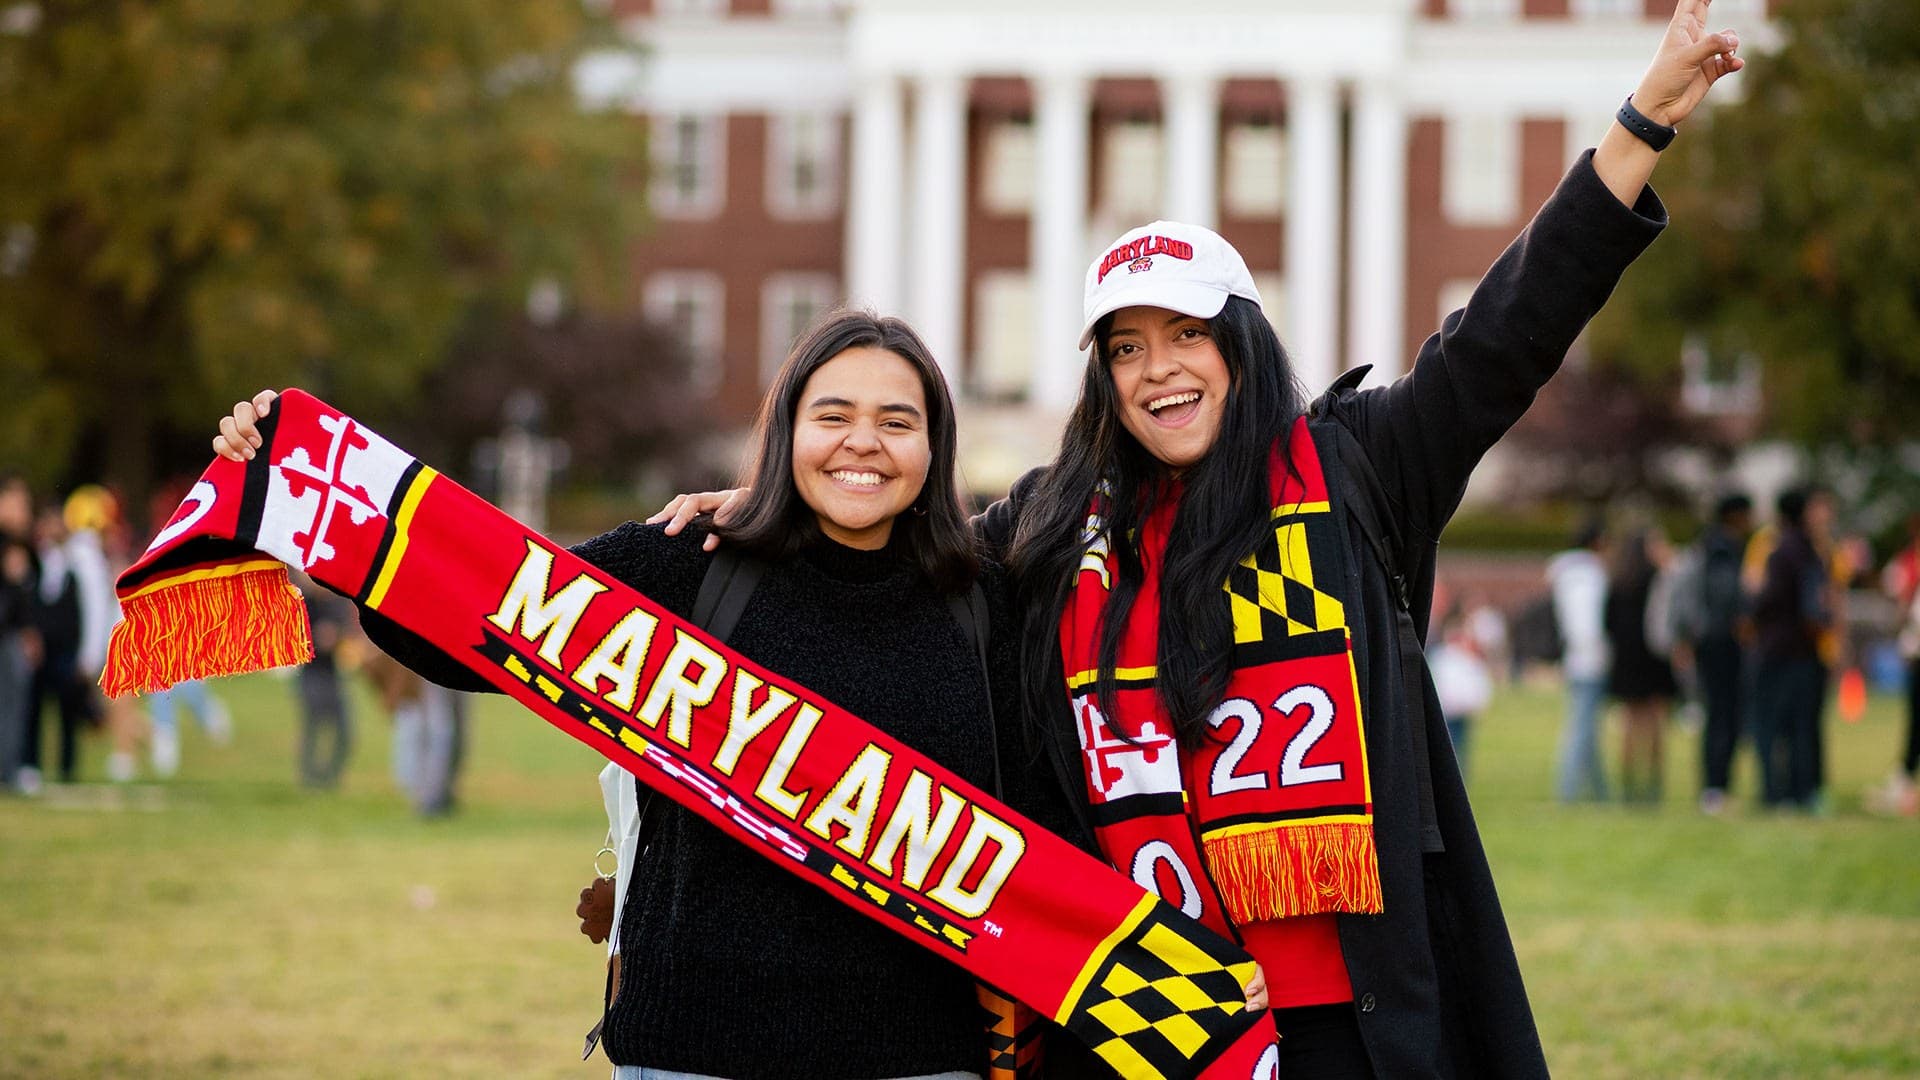 Students hold Maryland Banner at Terp Carnival